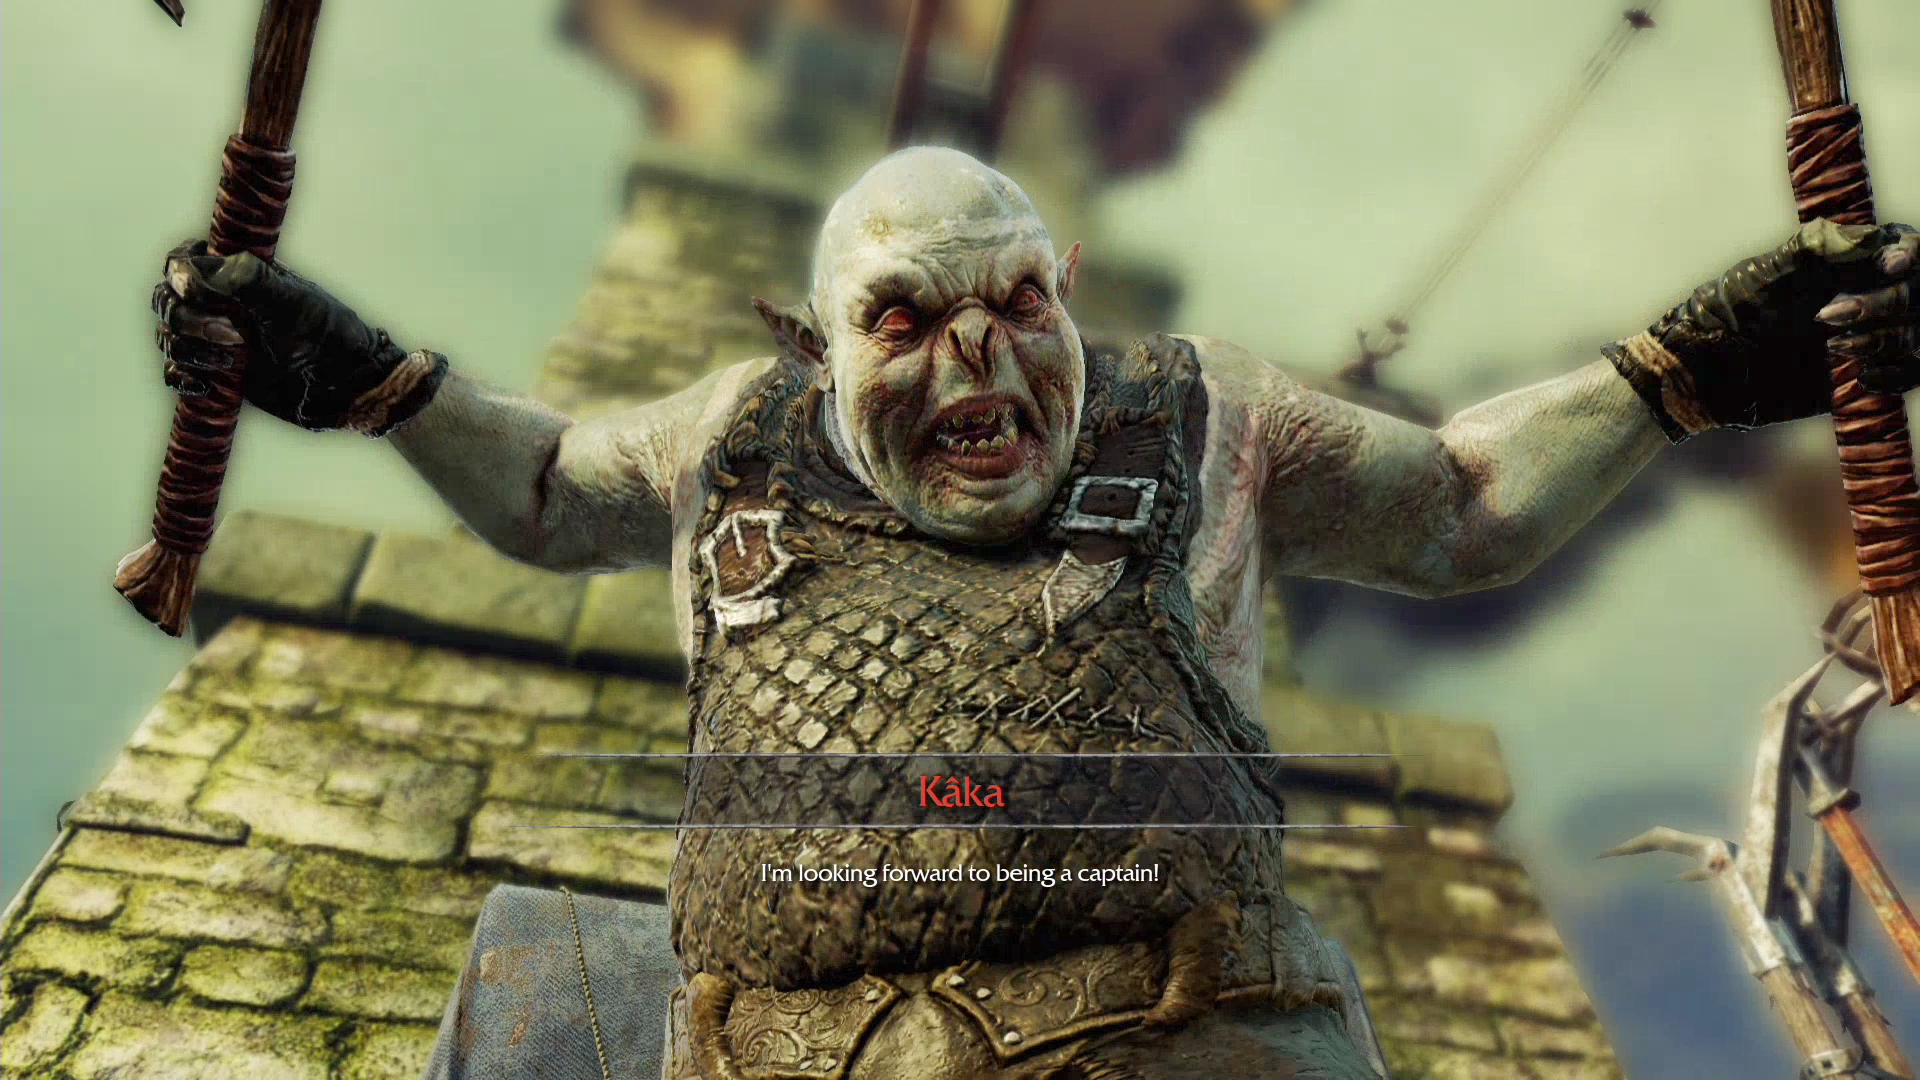 Play Shadow of Mordor and You'll Realize It's Not Assassin's Creed